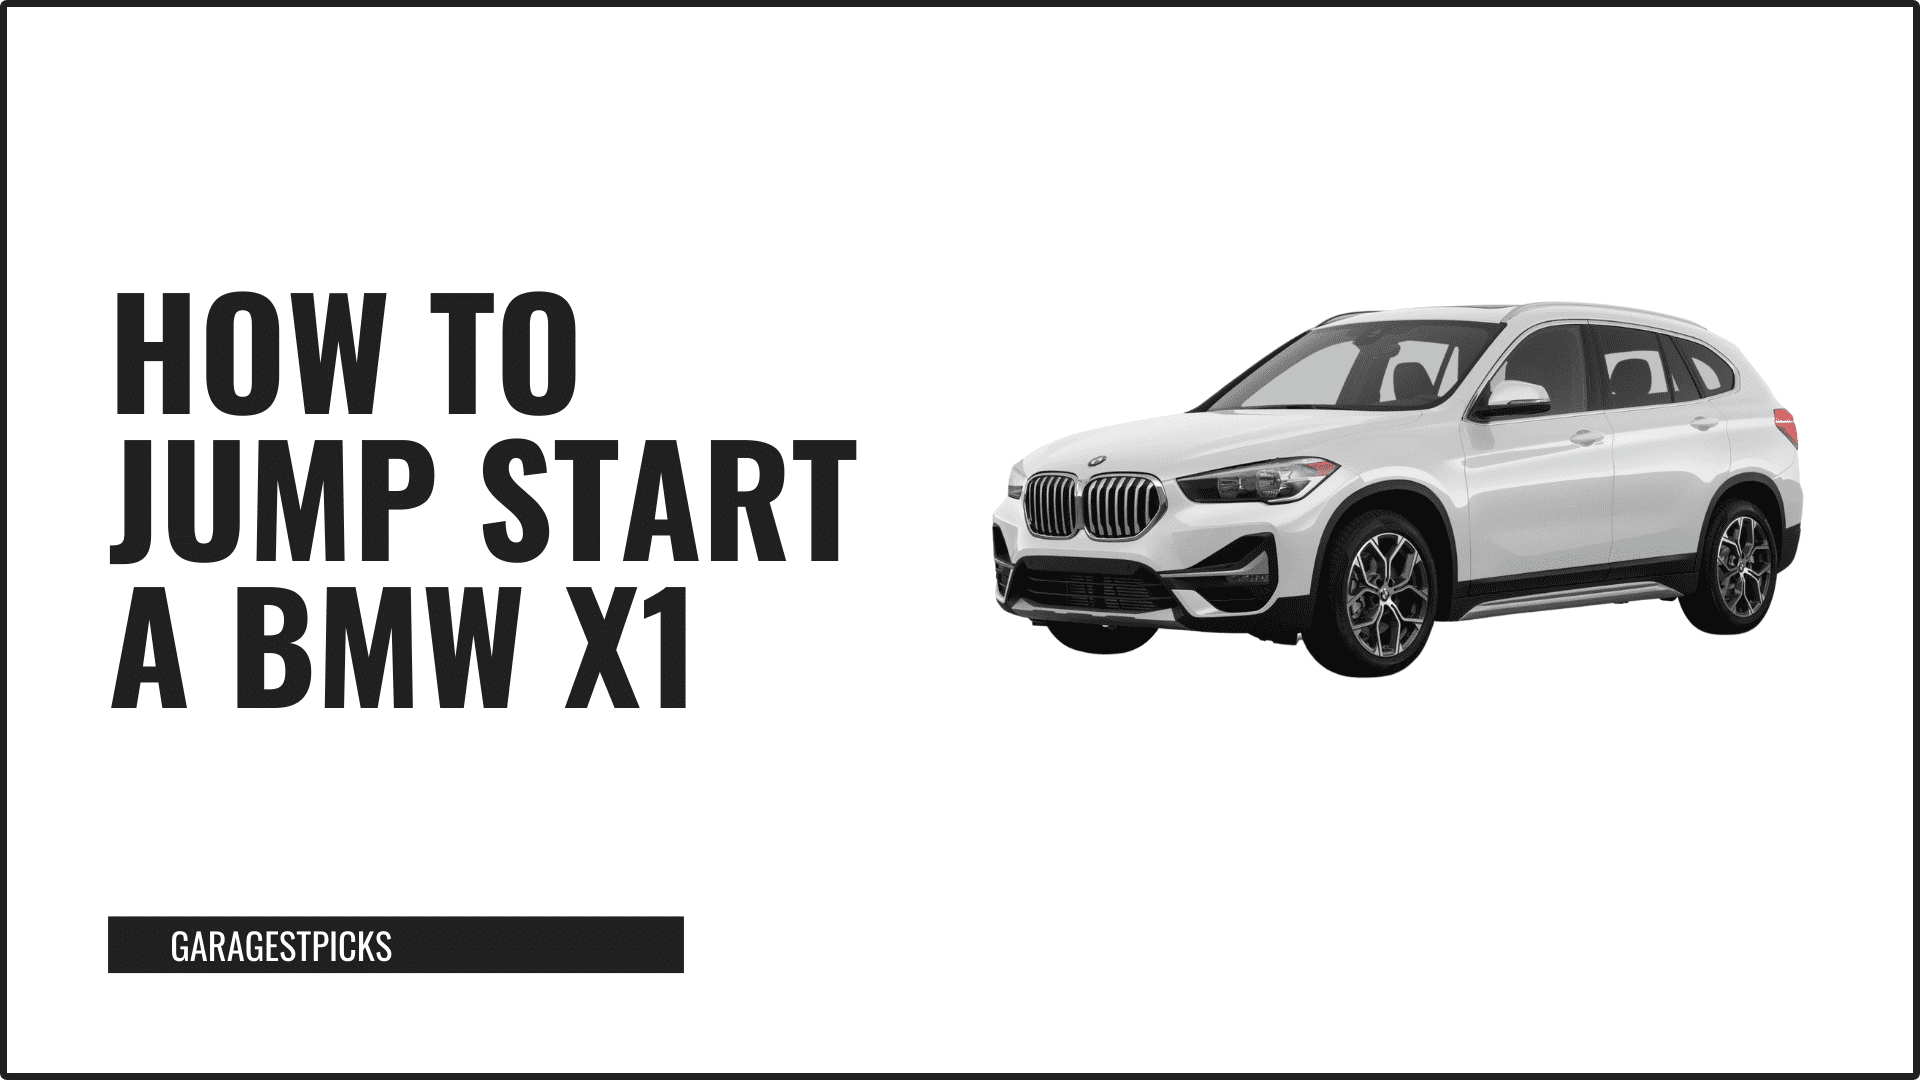 How to jump start a BMW X1 in black text on a white background with image of a BMW X1 car